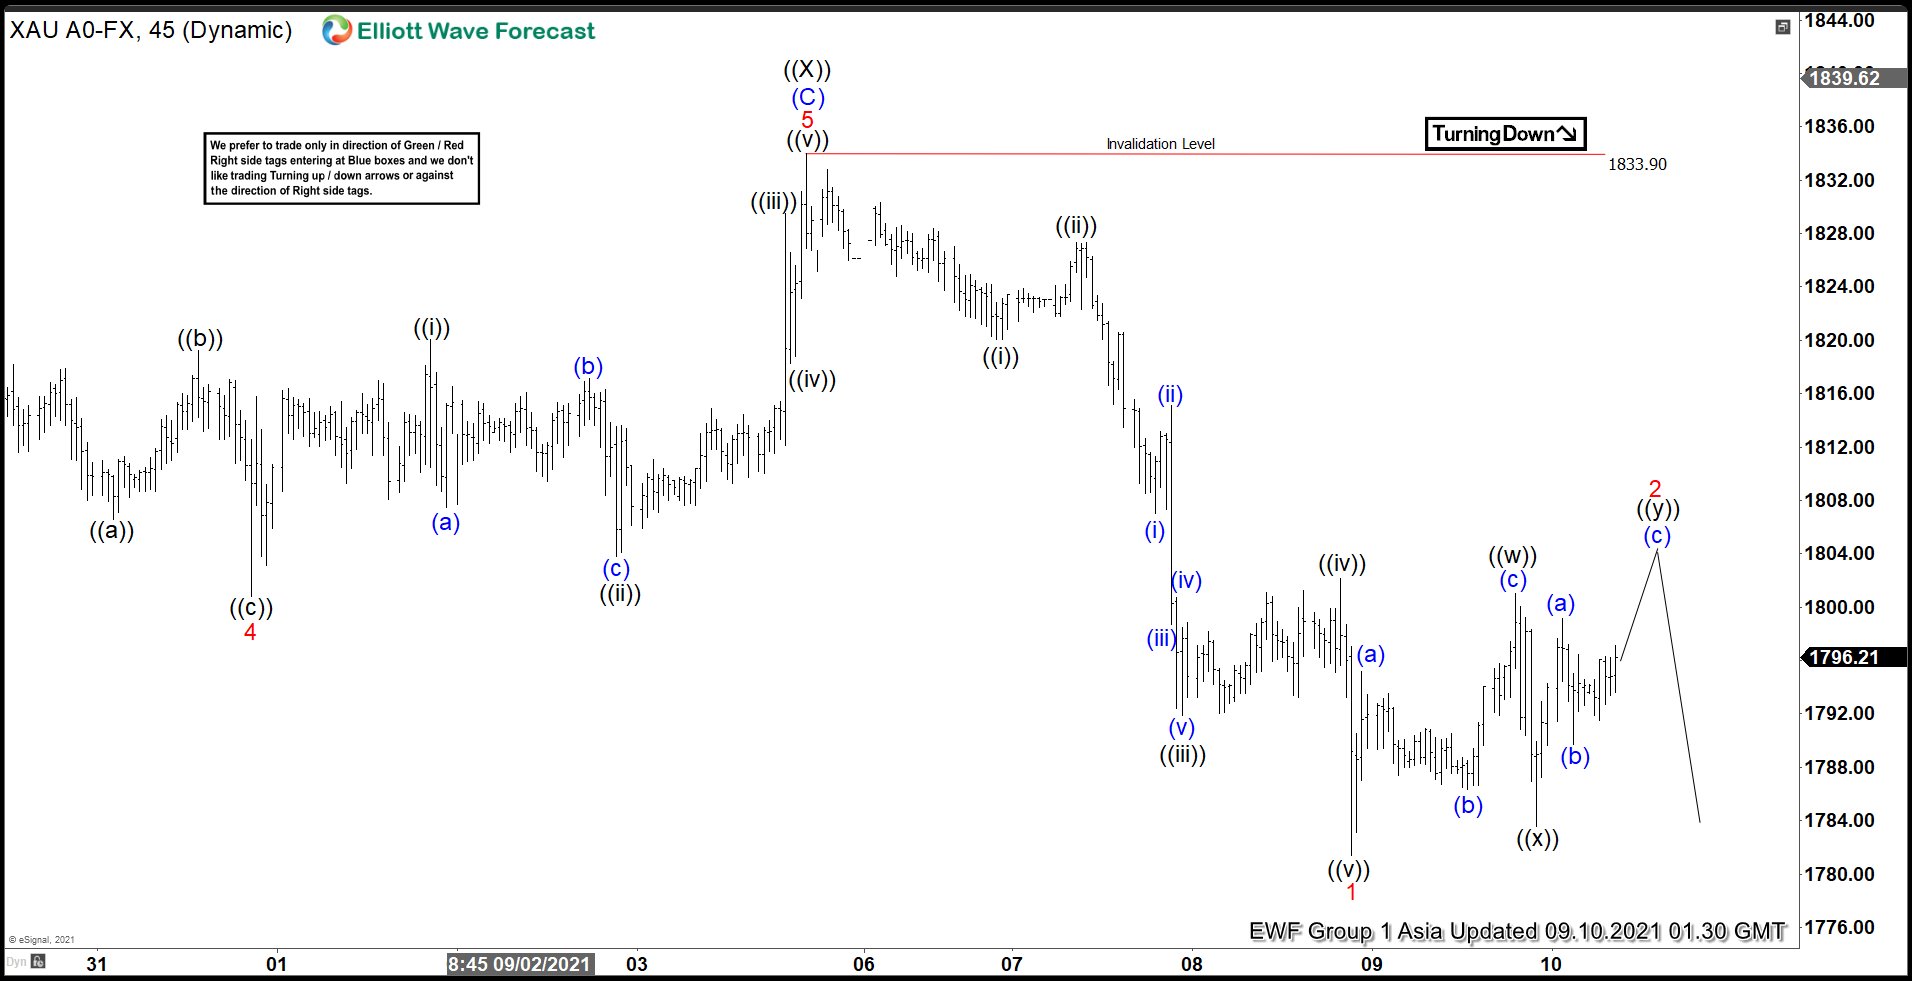 Elliott Wave View: Gold Rally Can Fail for More Downside